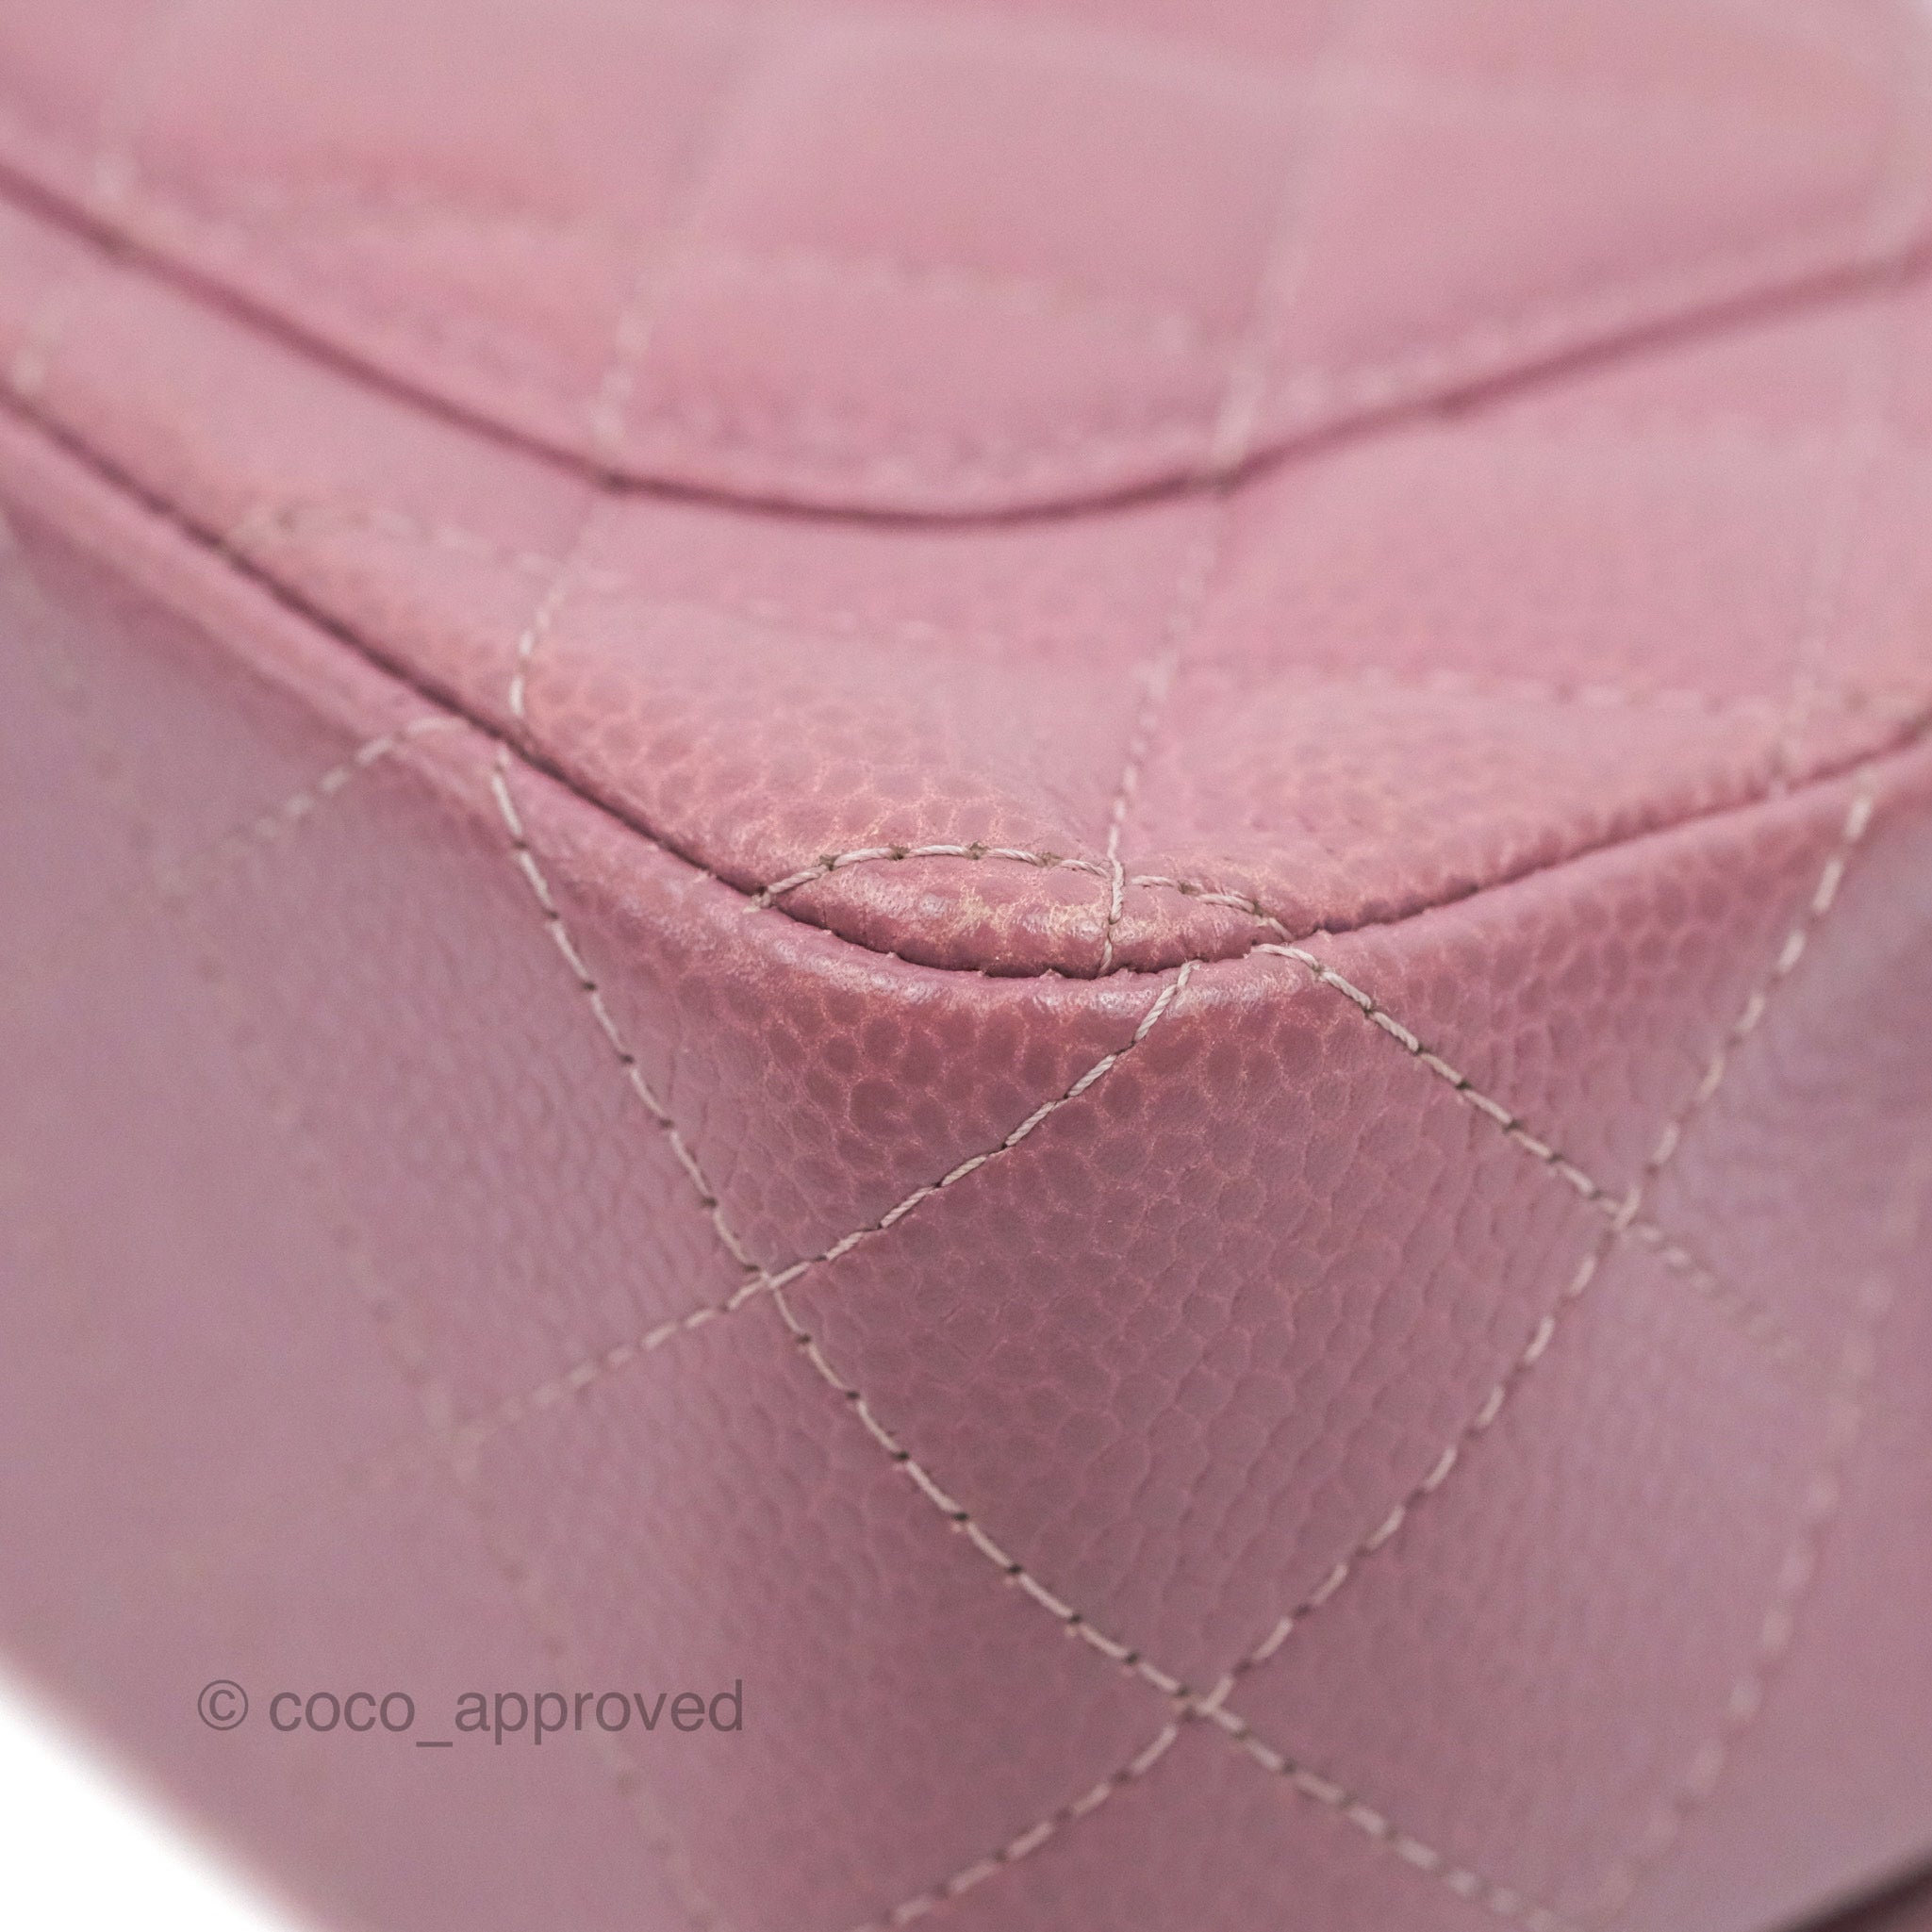 Chanel Quilted Mini Rectangular Flap Dark Pink Caviar Ruthenium Hardwa – Coco  Approved Studio